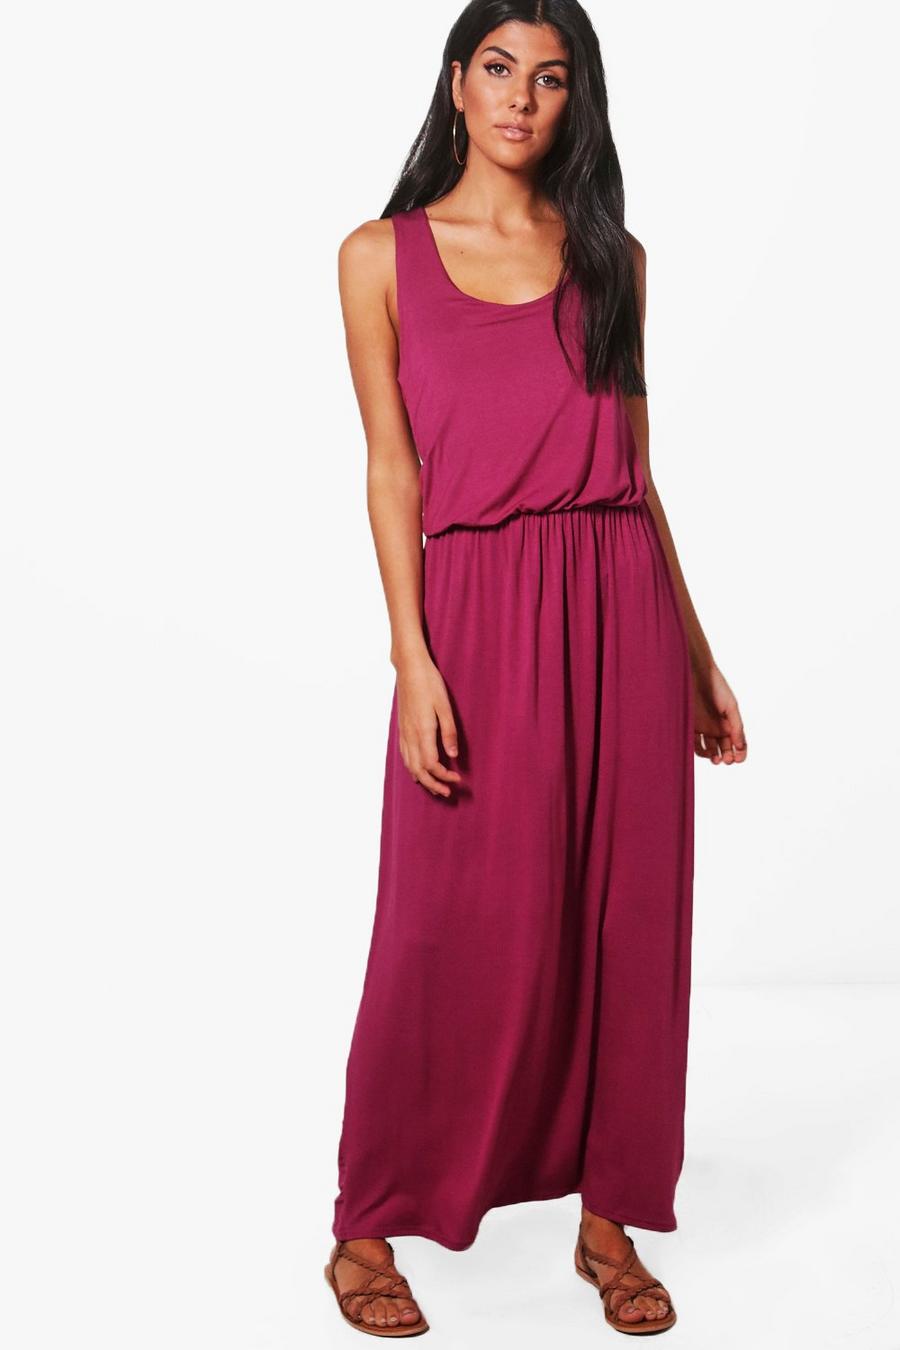 Robe maxi dos nageur, Fuchsia pink image number 1